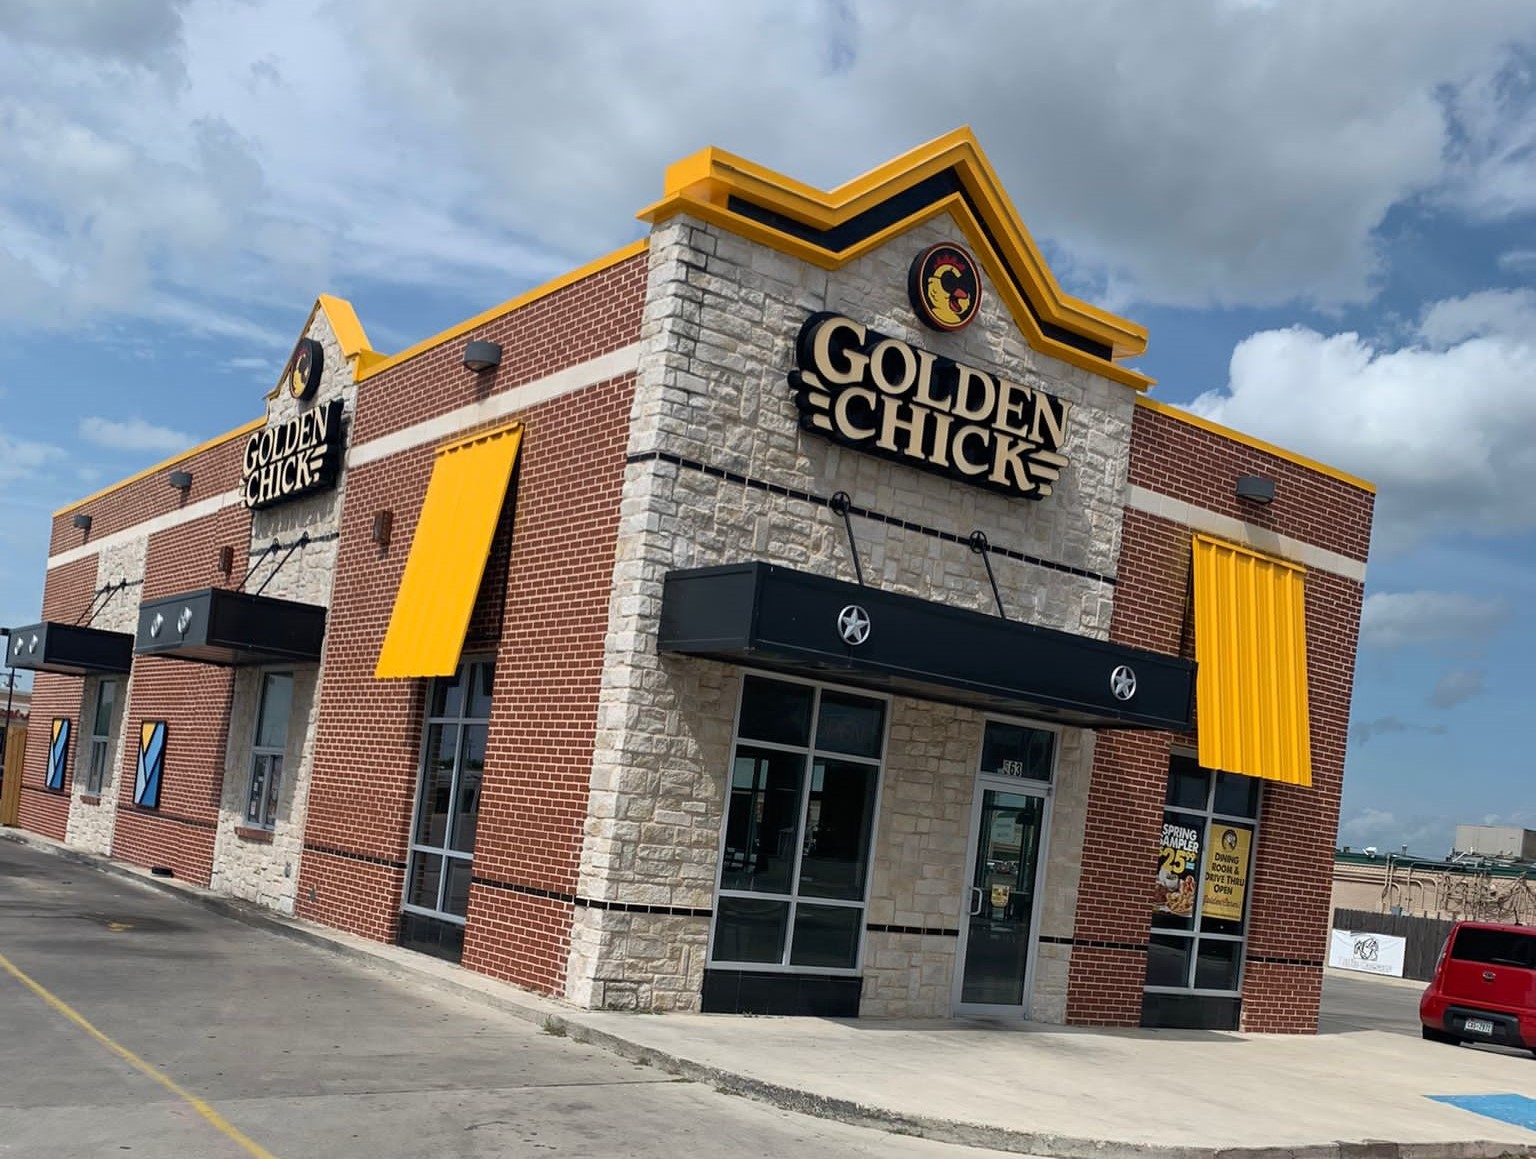 Golden Chick storefront.  Your local Golden Chick fast food restaurant in Brownwood, Texas